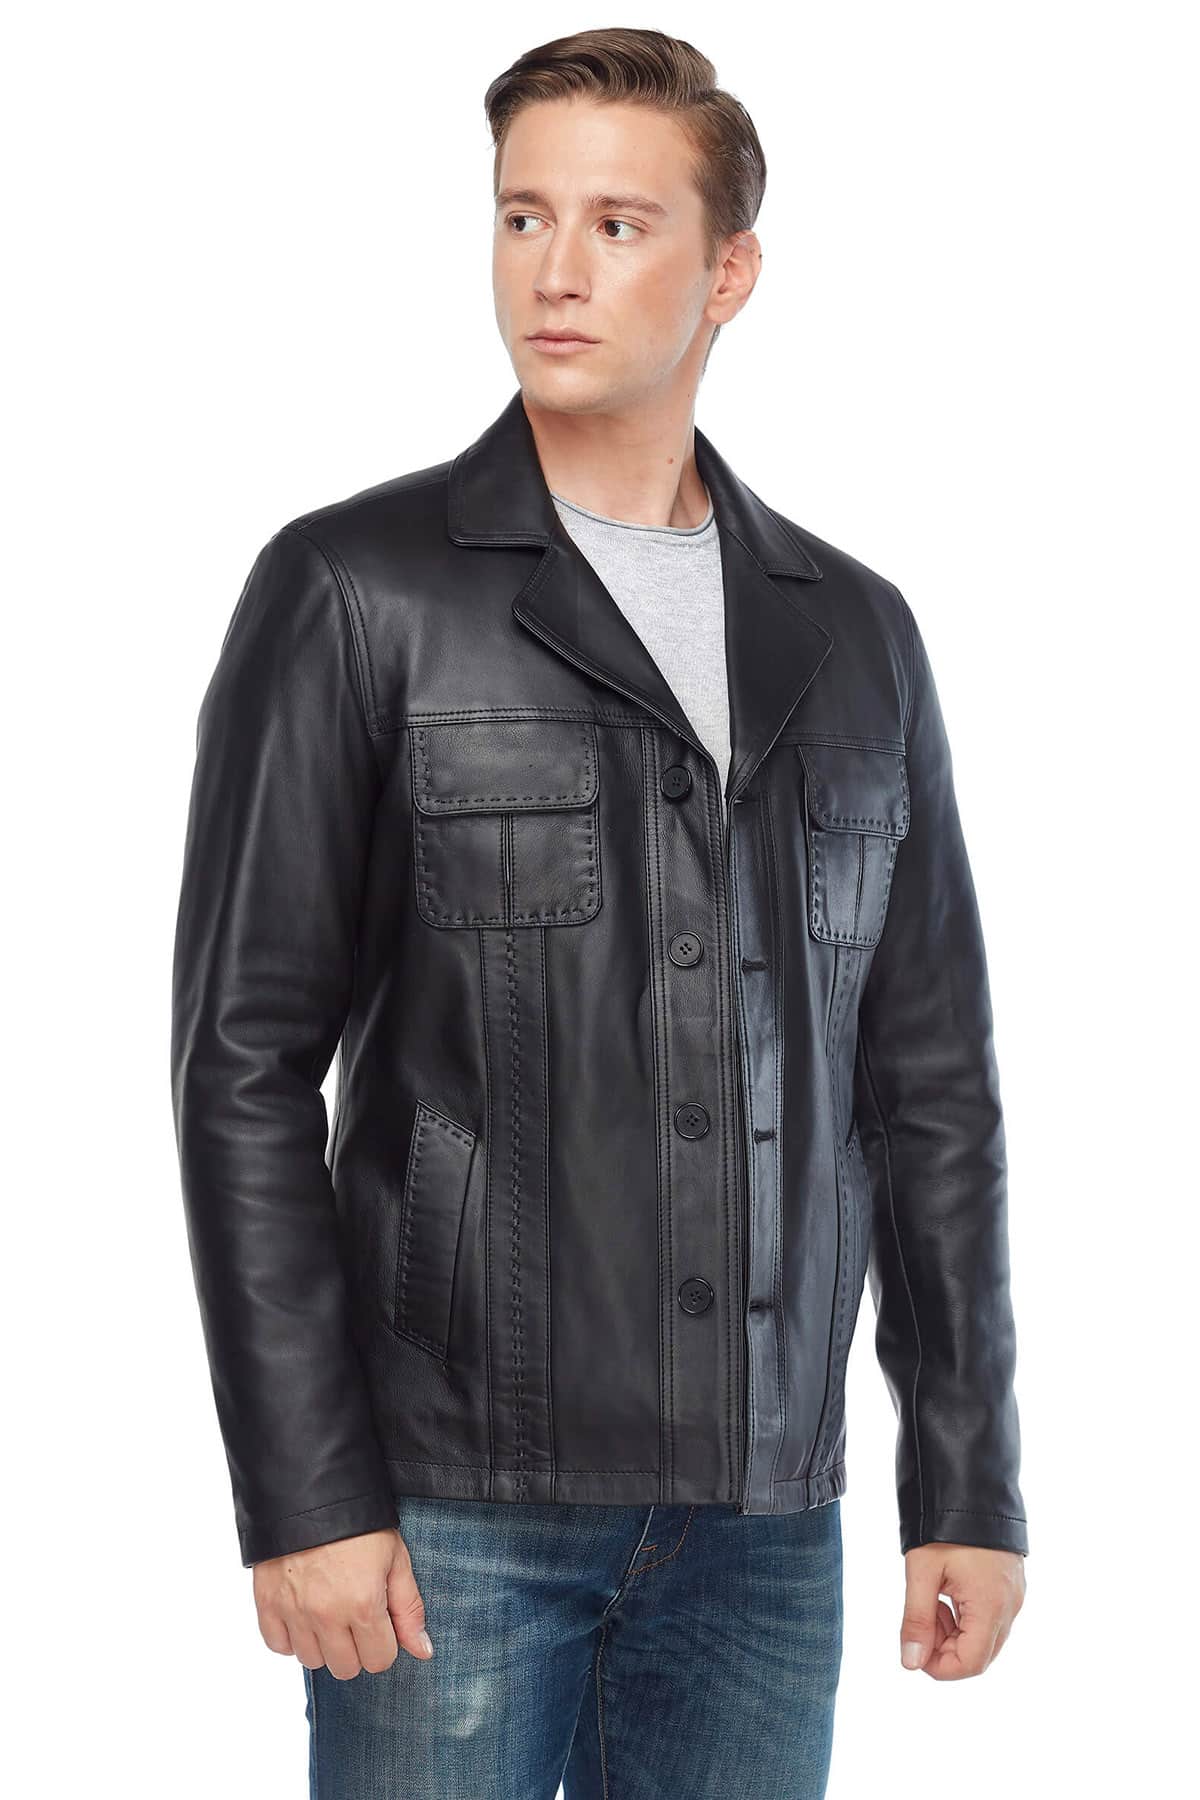 Charley Speed Men's 100 % Real Black Leather Jacket